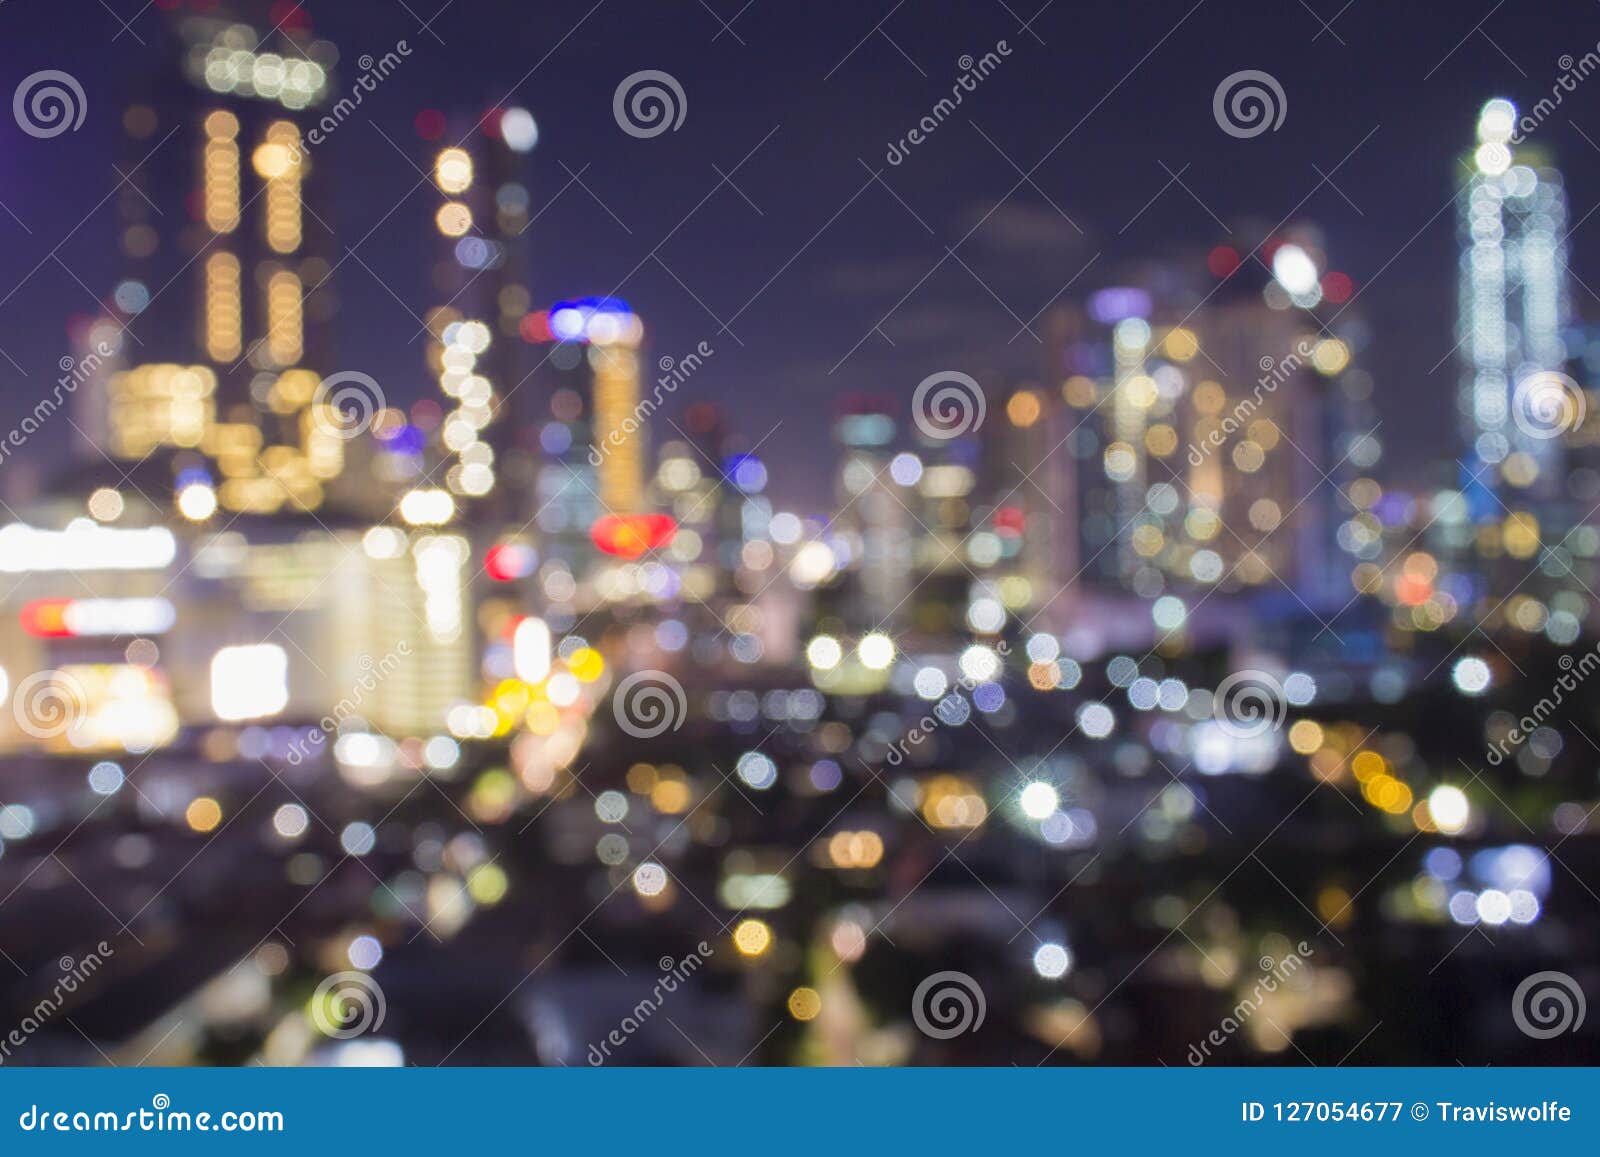 blurred city shot showing electrical grid and great urban planning to power millions of homes and give electricity and lights to e